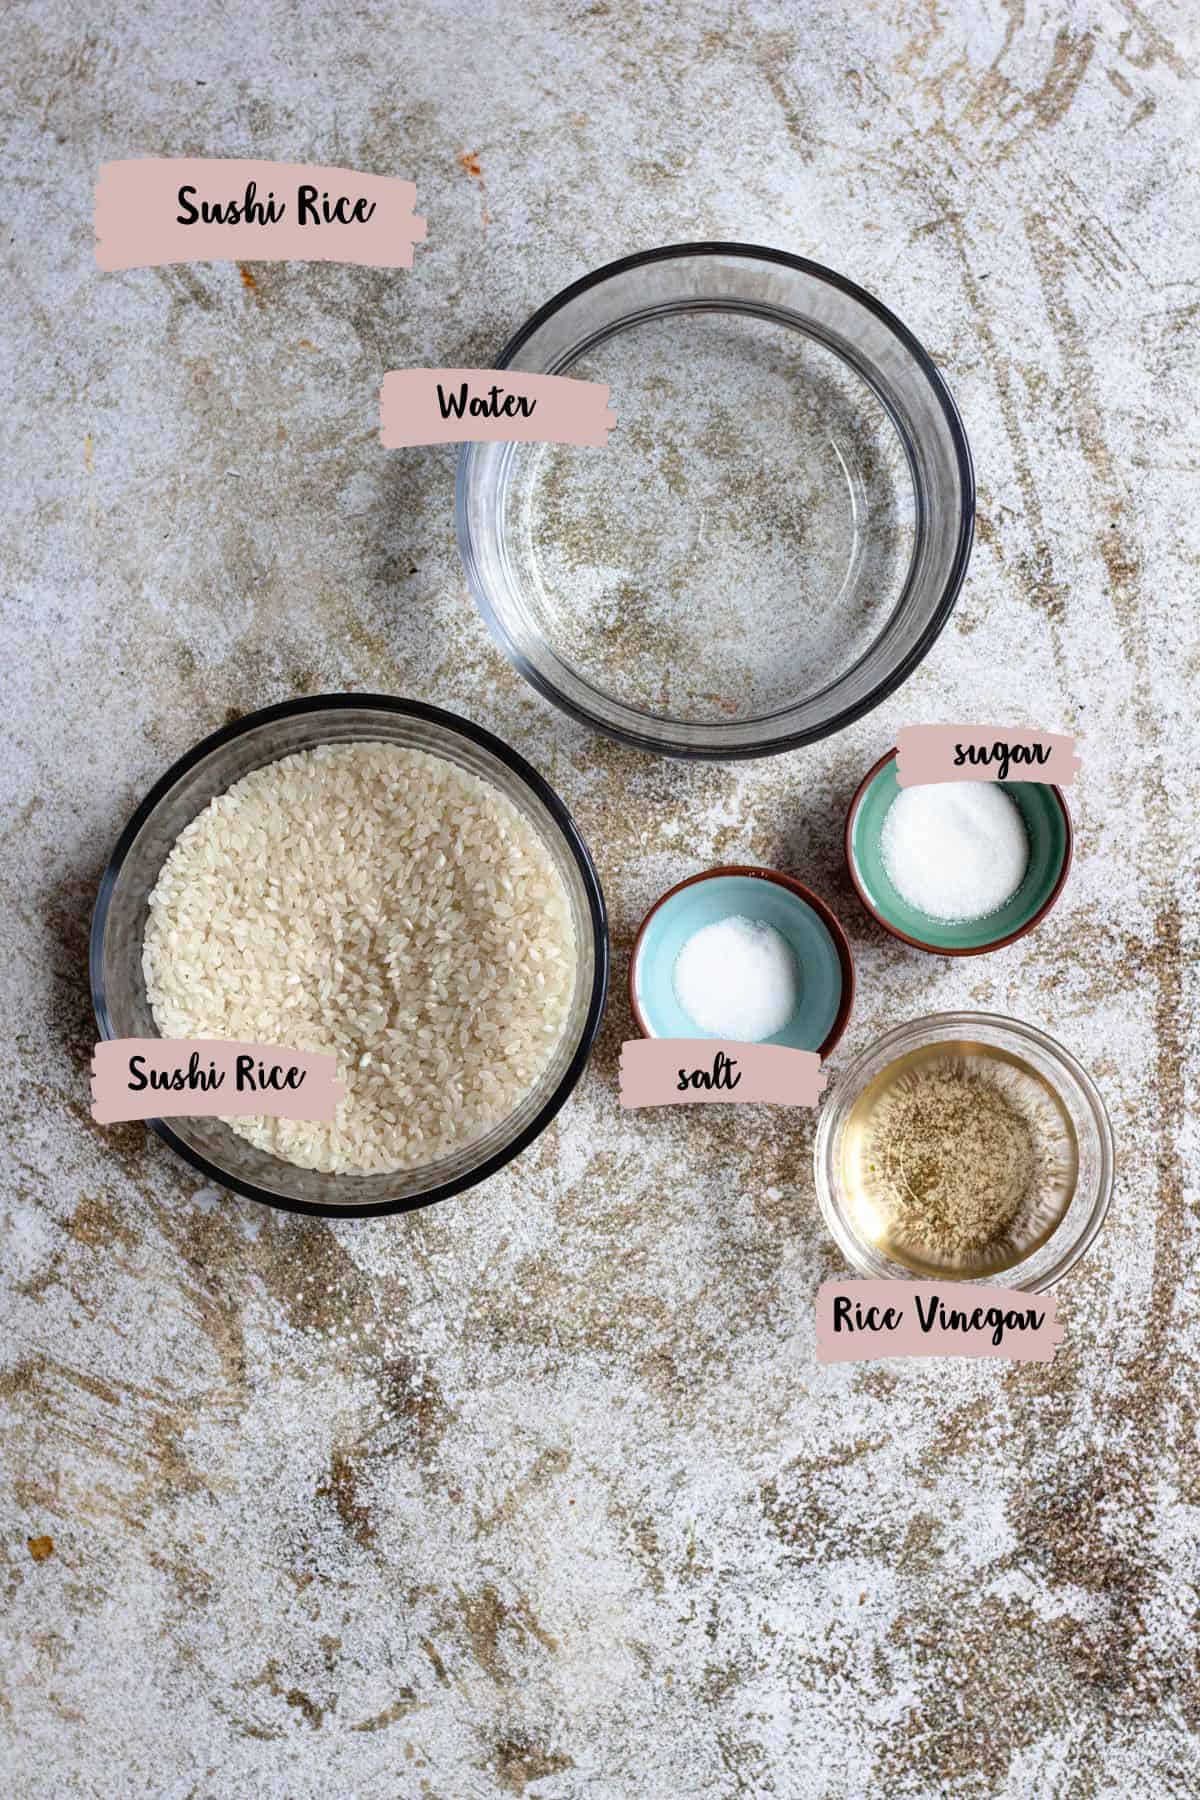 Ingredients shown are used to prepare sushi rice without a rice cooker. 